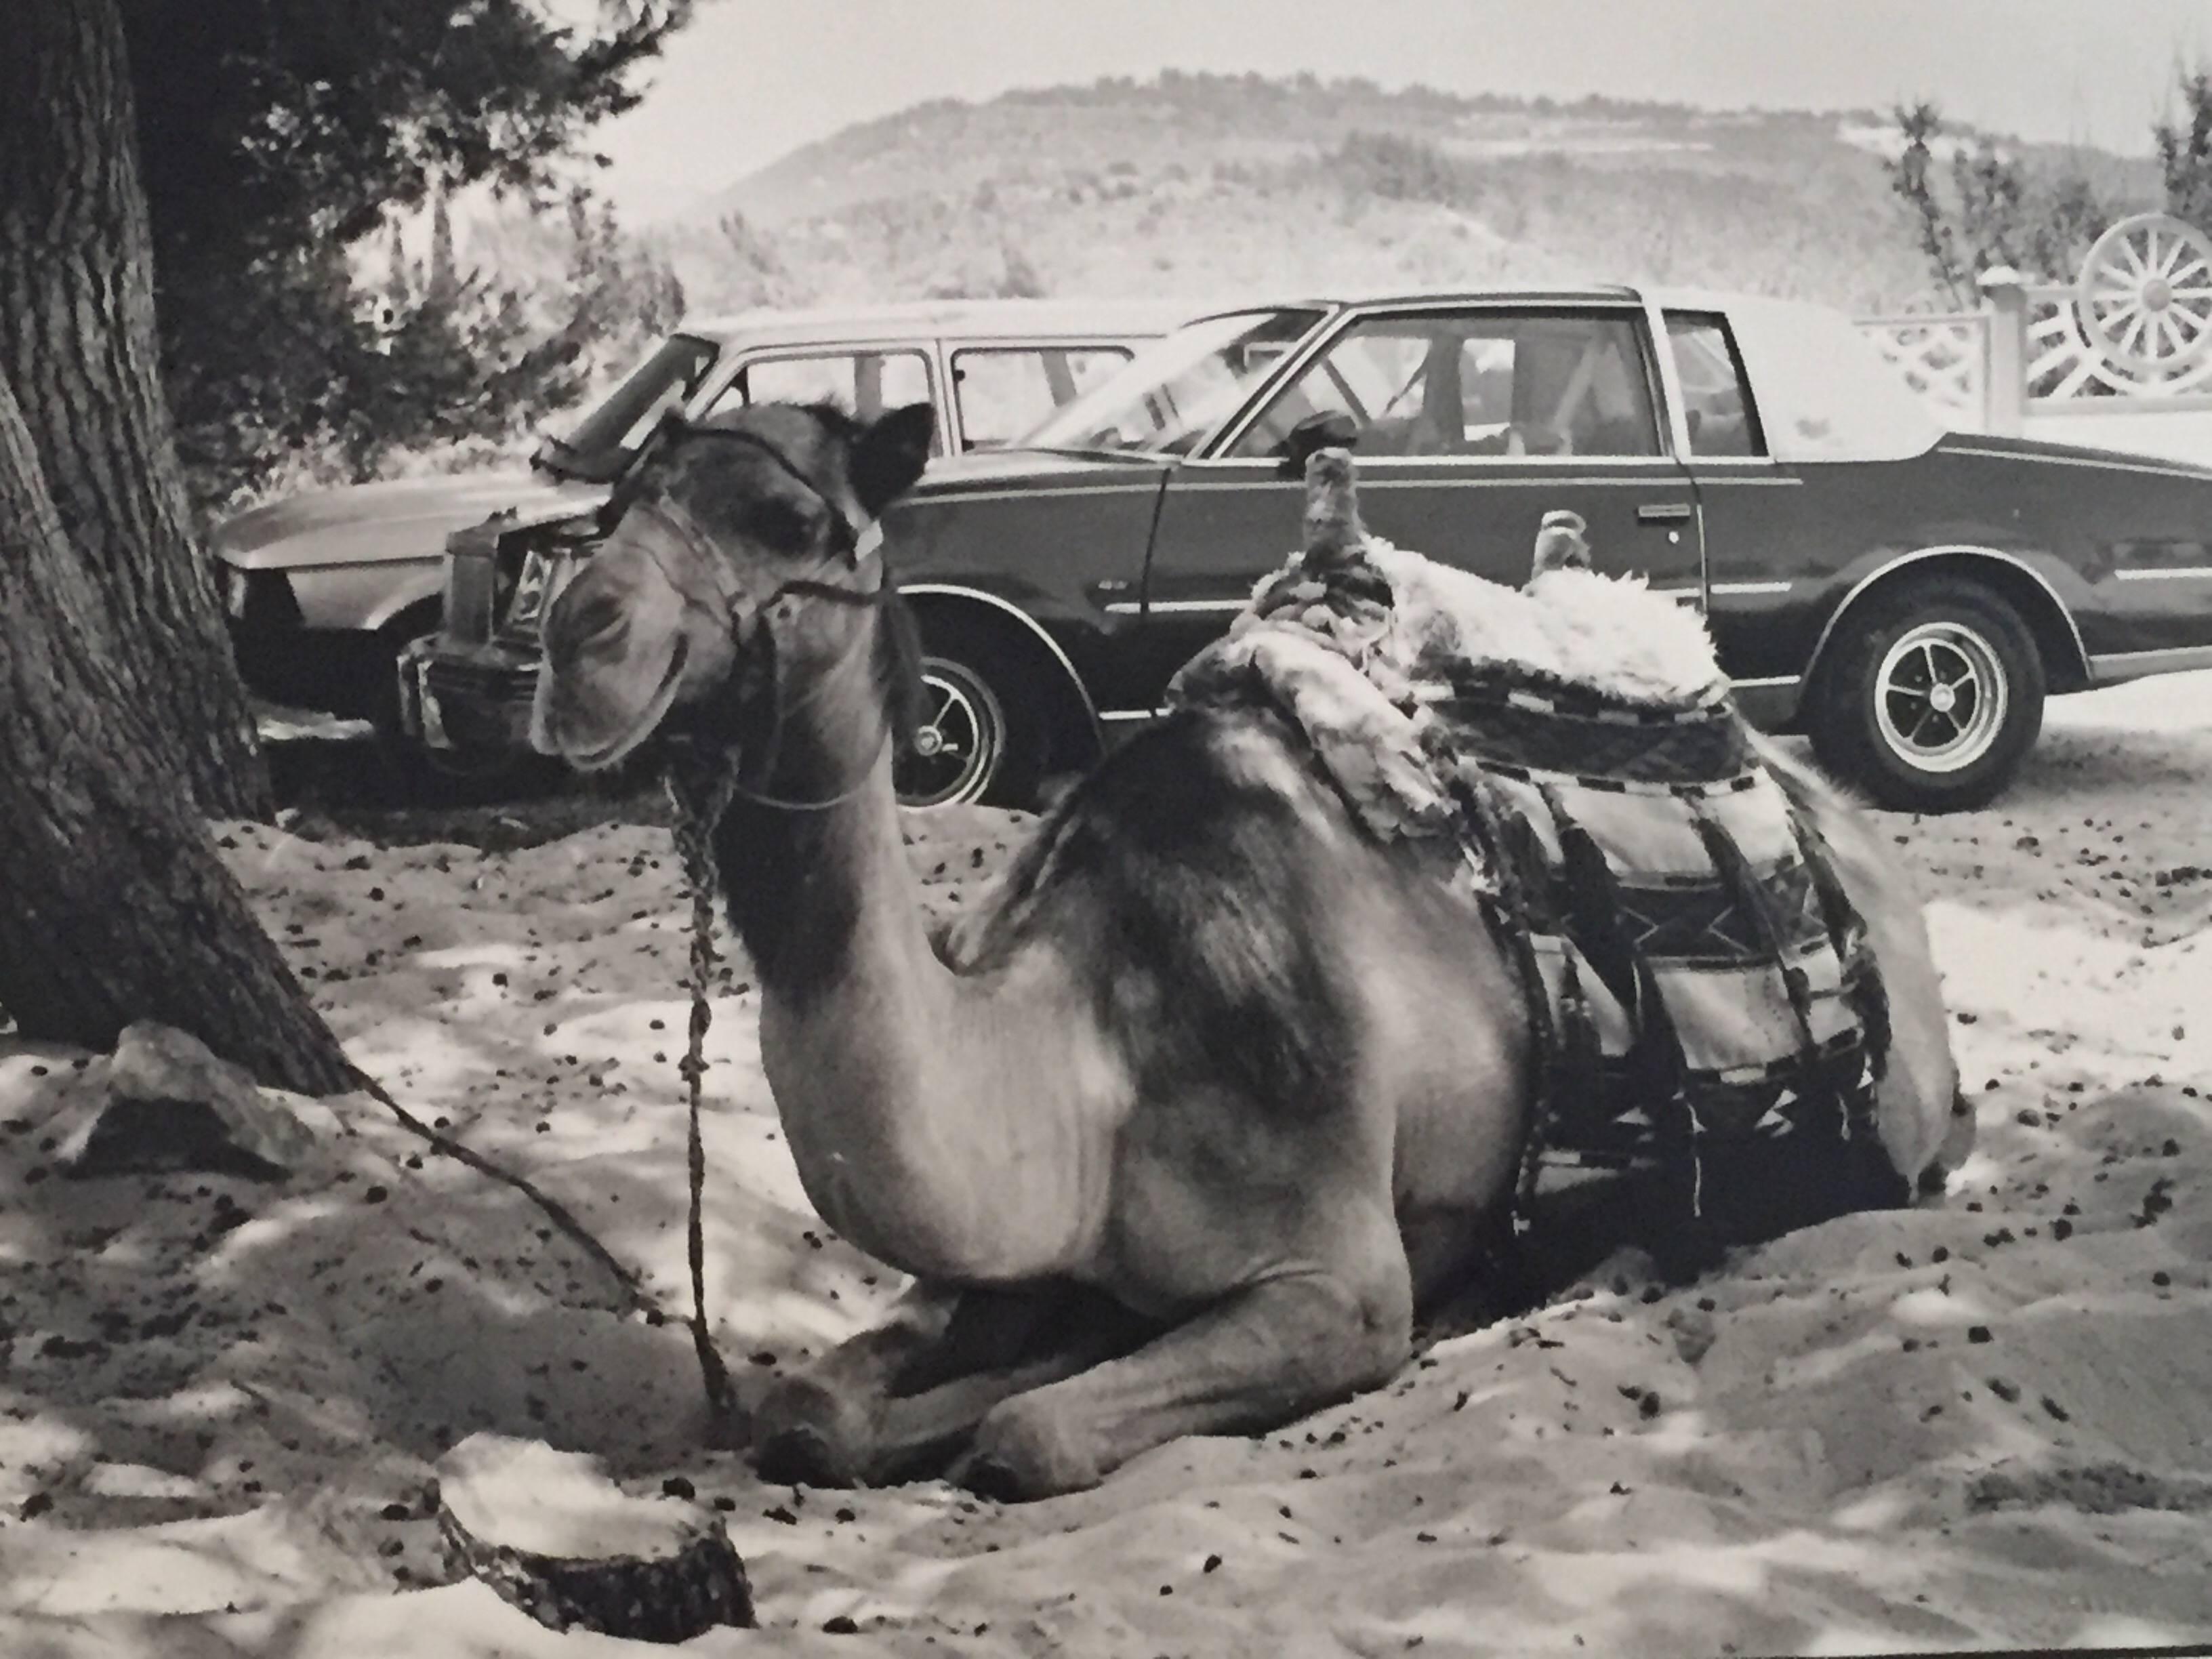 Unknown Black and White Photograph - Camel and Cadillac, Black & White Original Silver Gelatin Vintage Photograph